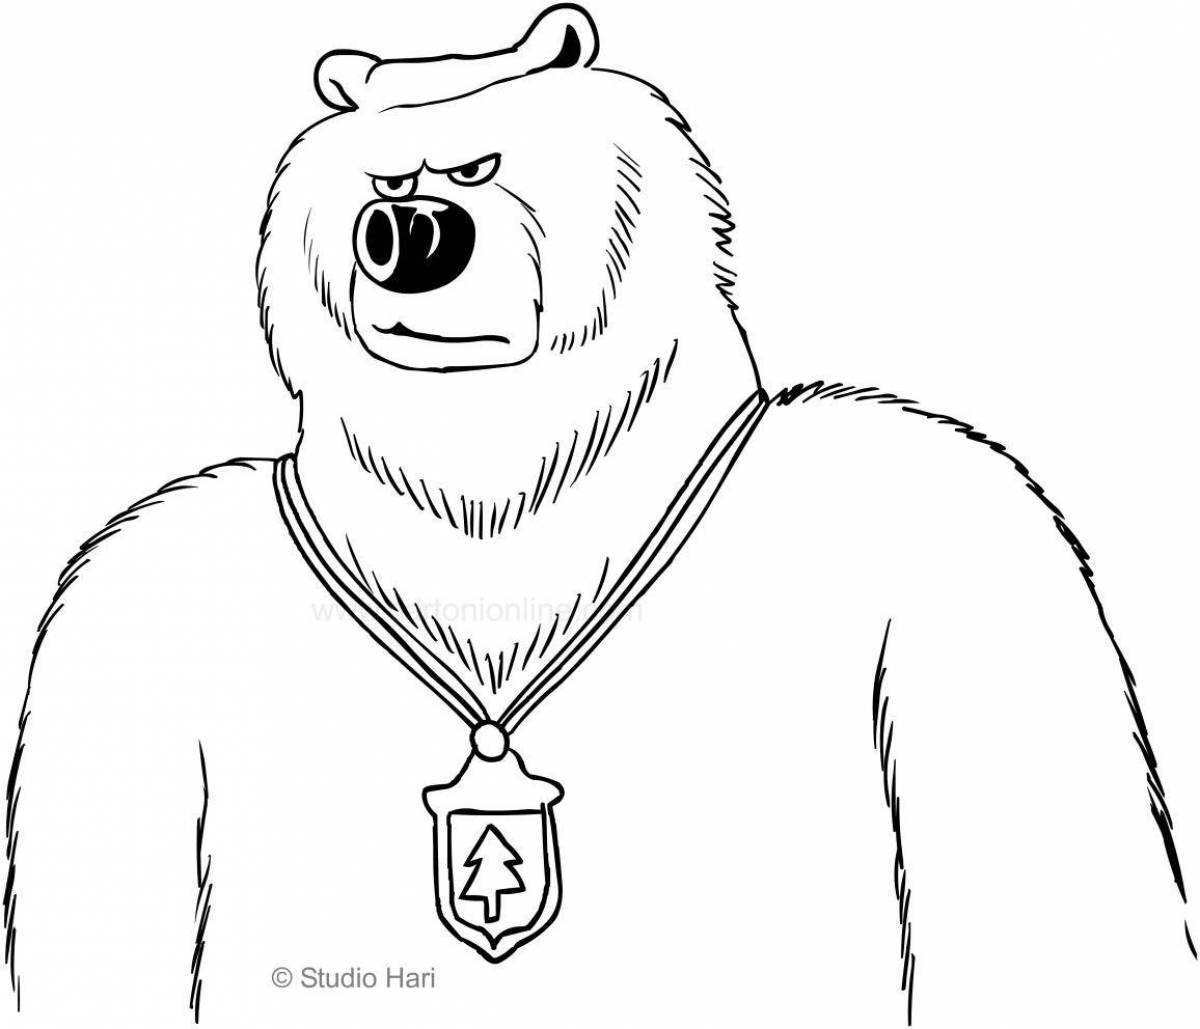 Crazy grizzlies and lemmings coloring page